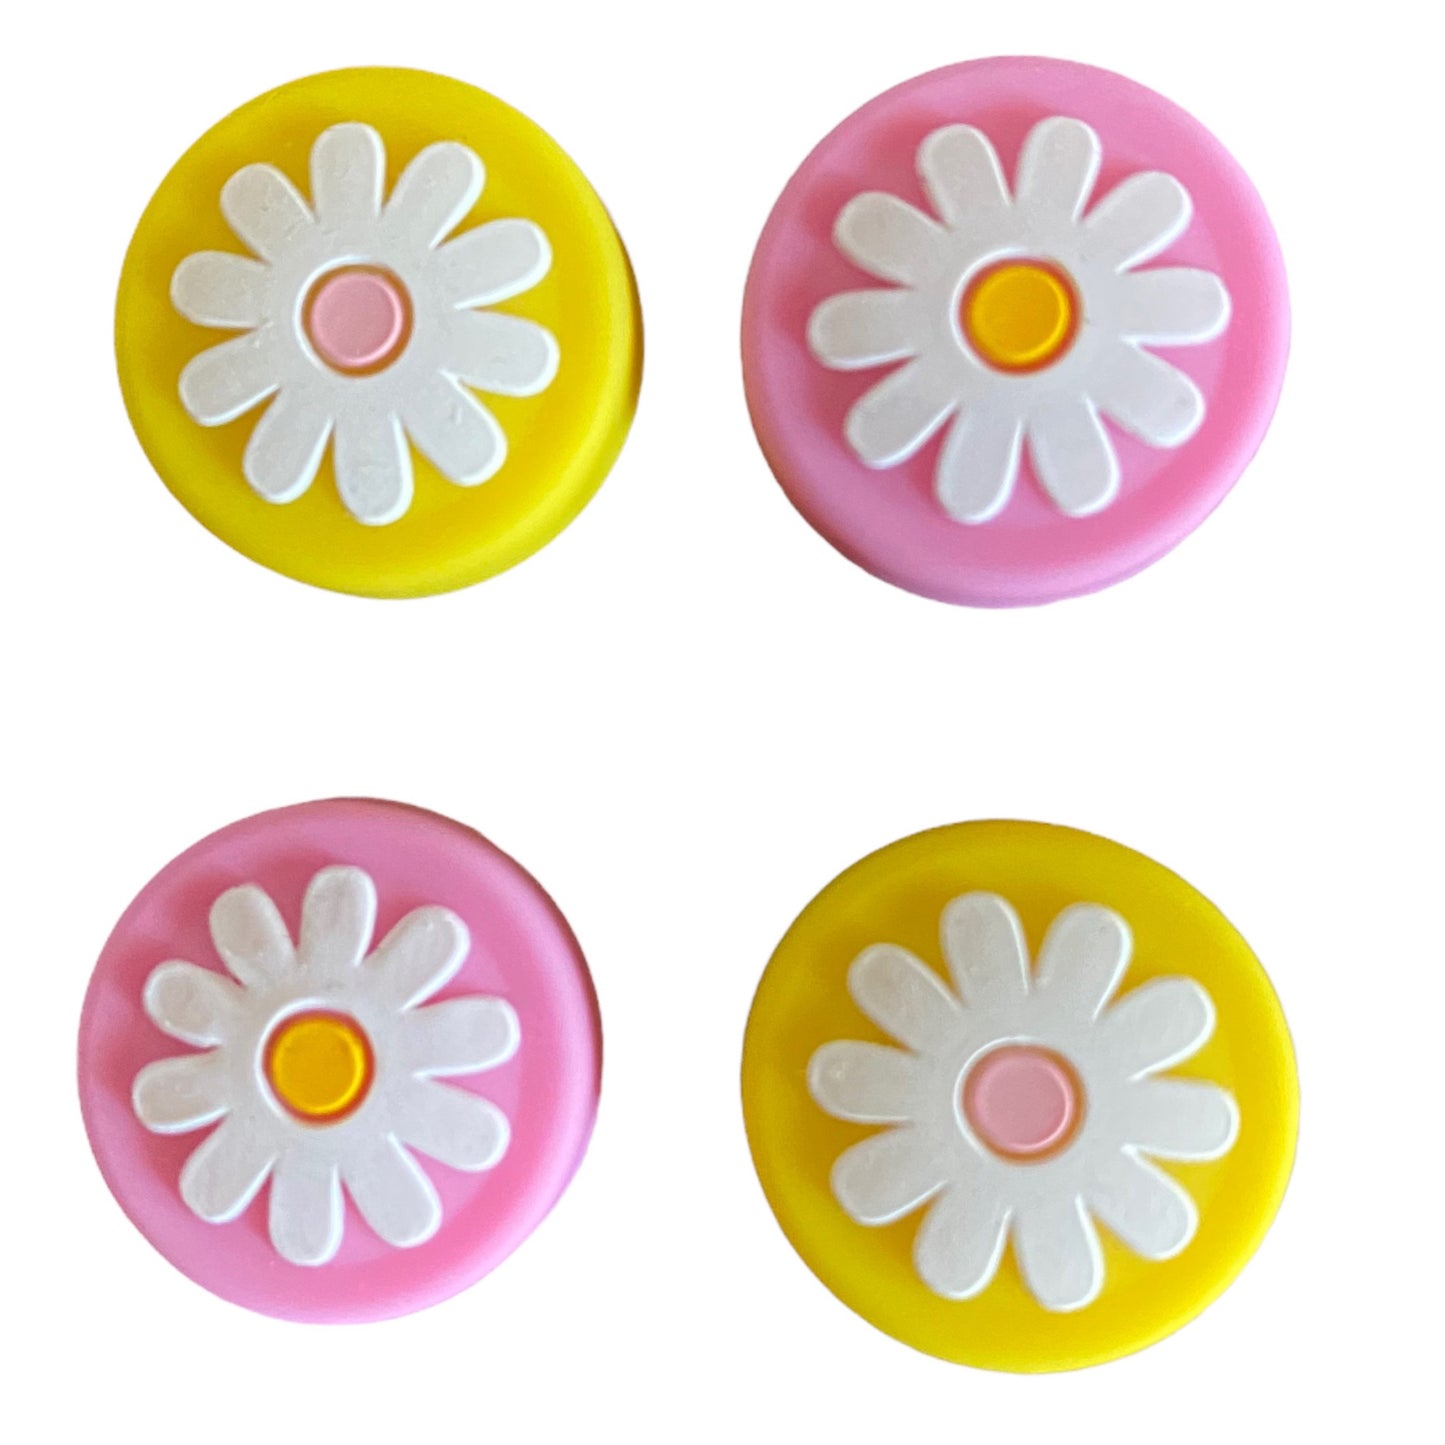 JenDore Pink Yellow Flower 4Pcs Silicone Thumb Grip Caps for Nintendo Switch